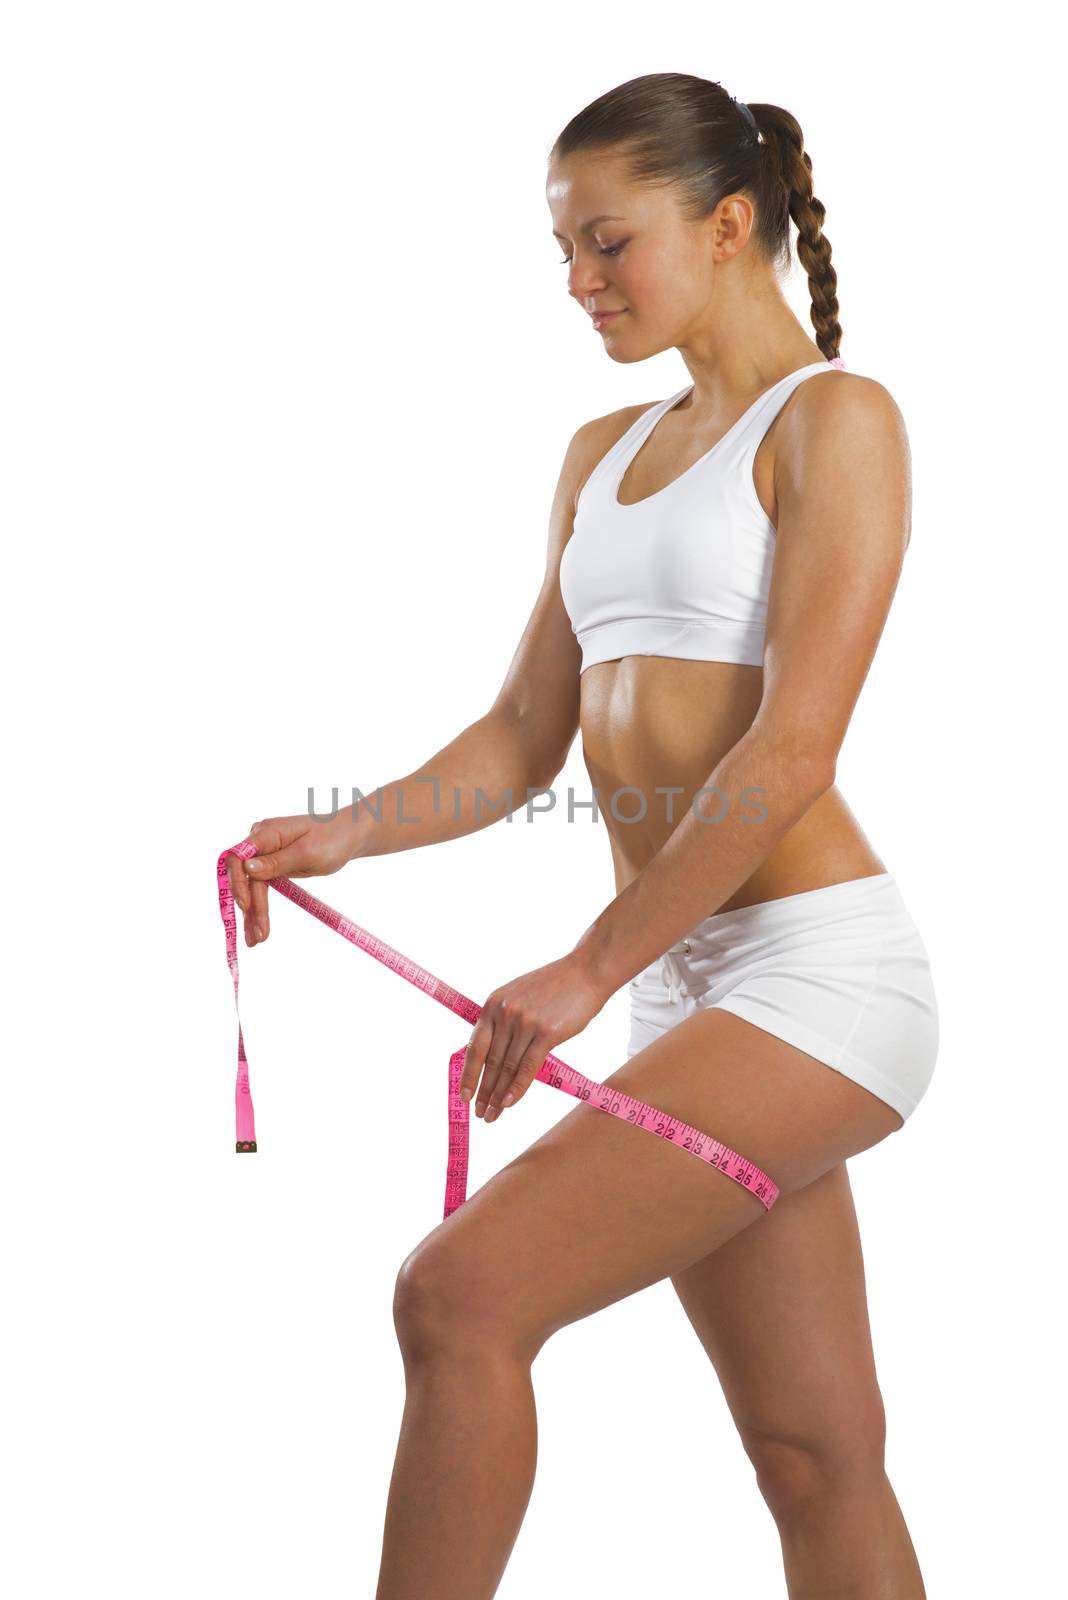 image of a young athletic woman measuring thigh